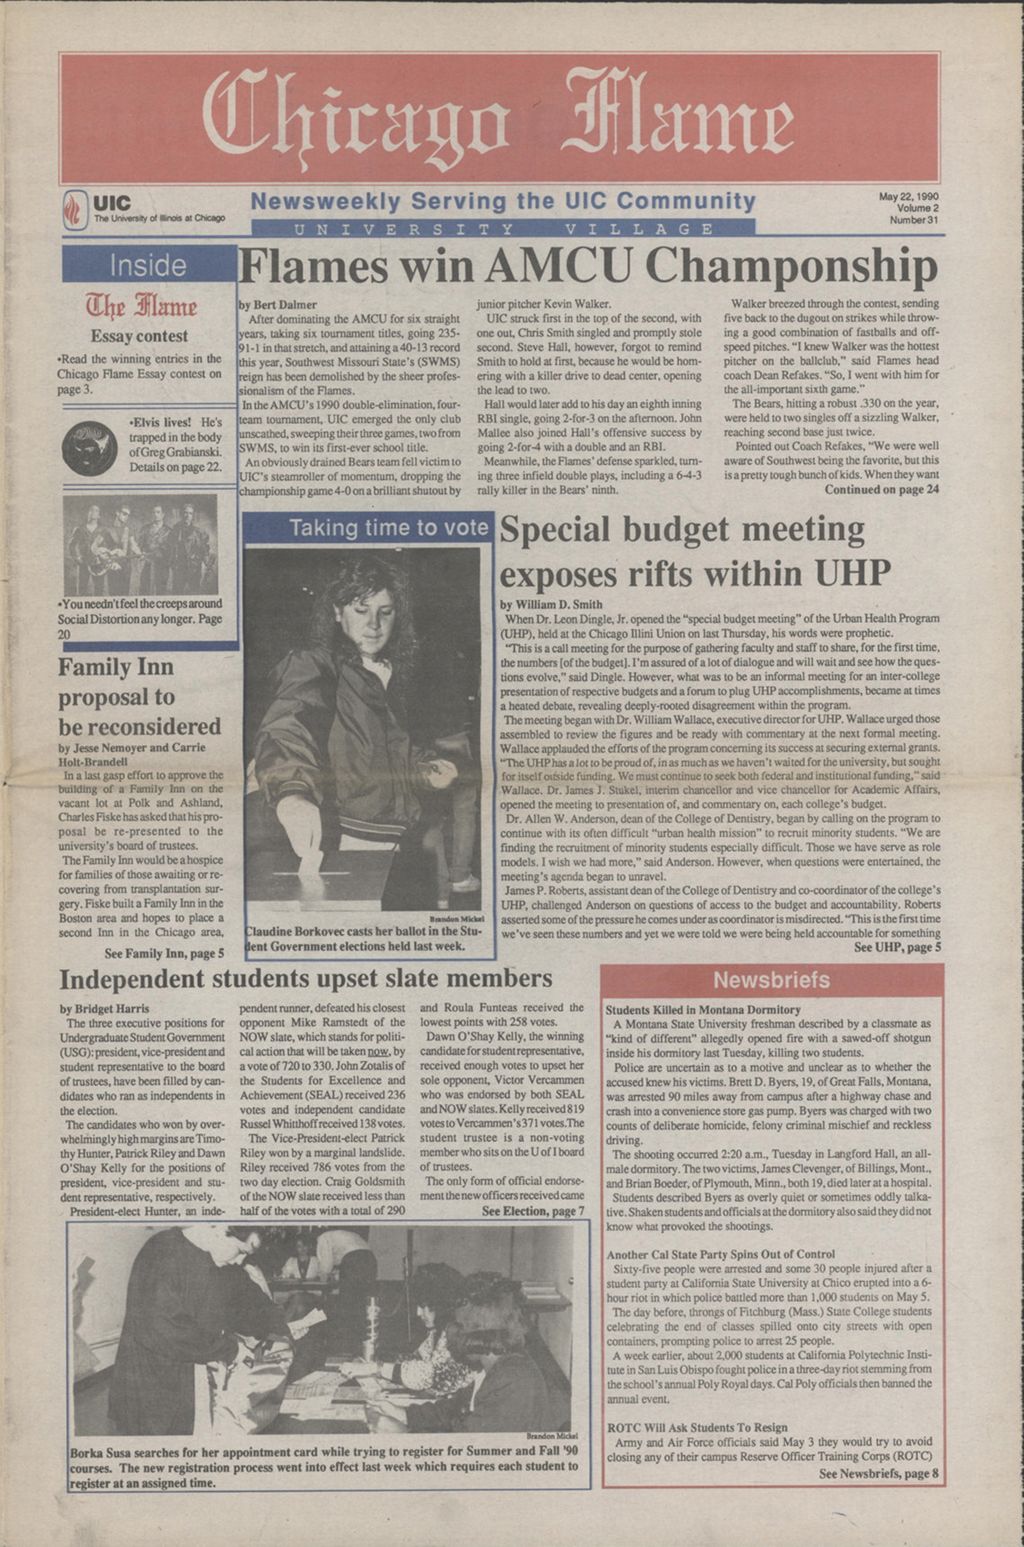 Miniature of Chicago Flame (May 22, 1990)